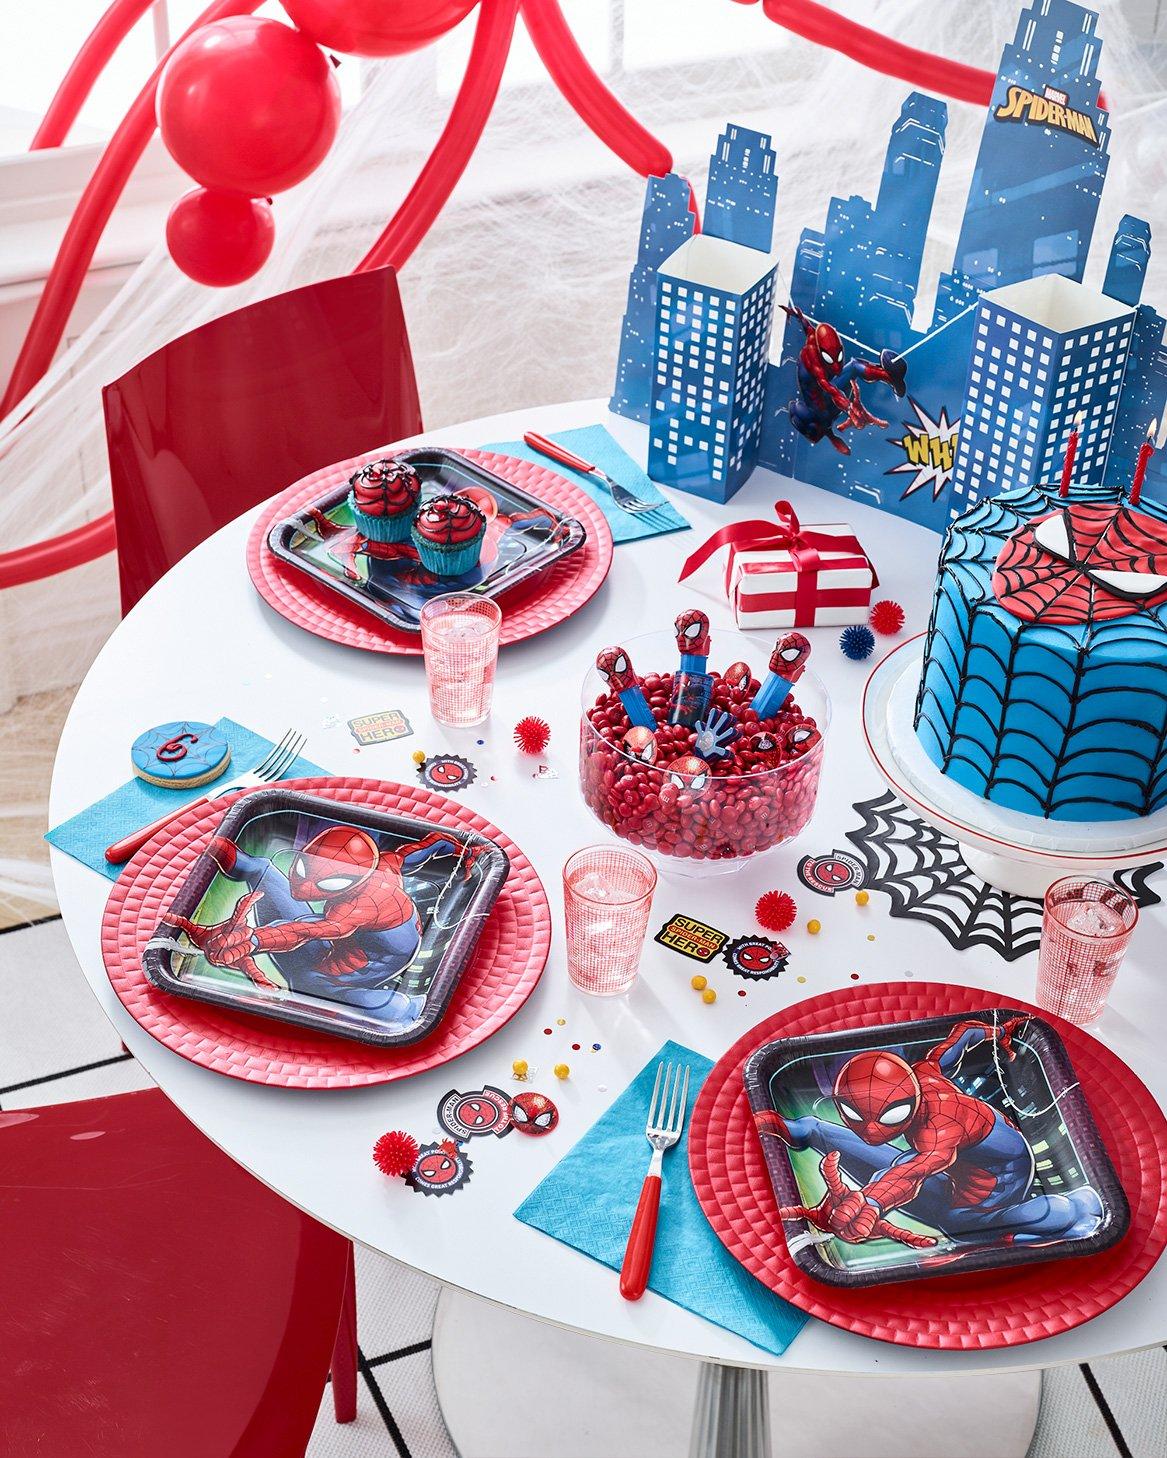 Spider-Man tableware and decor